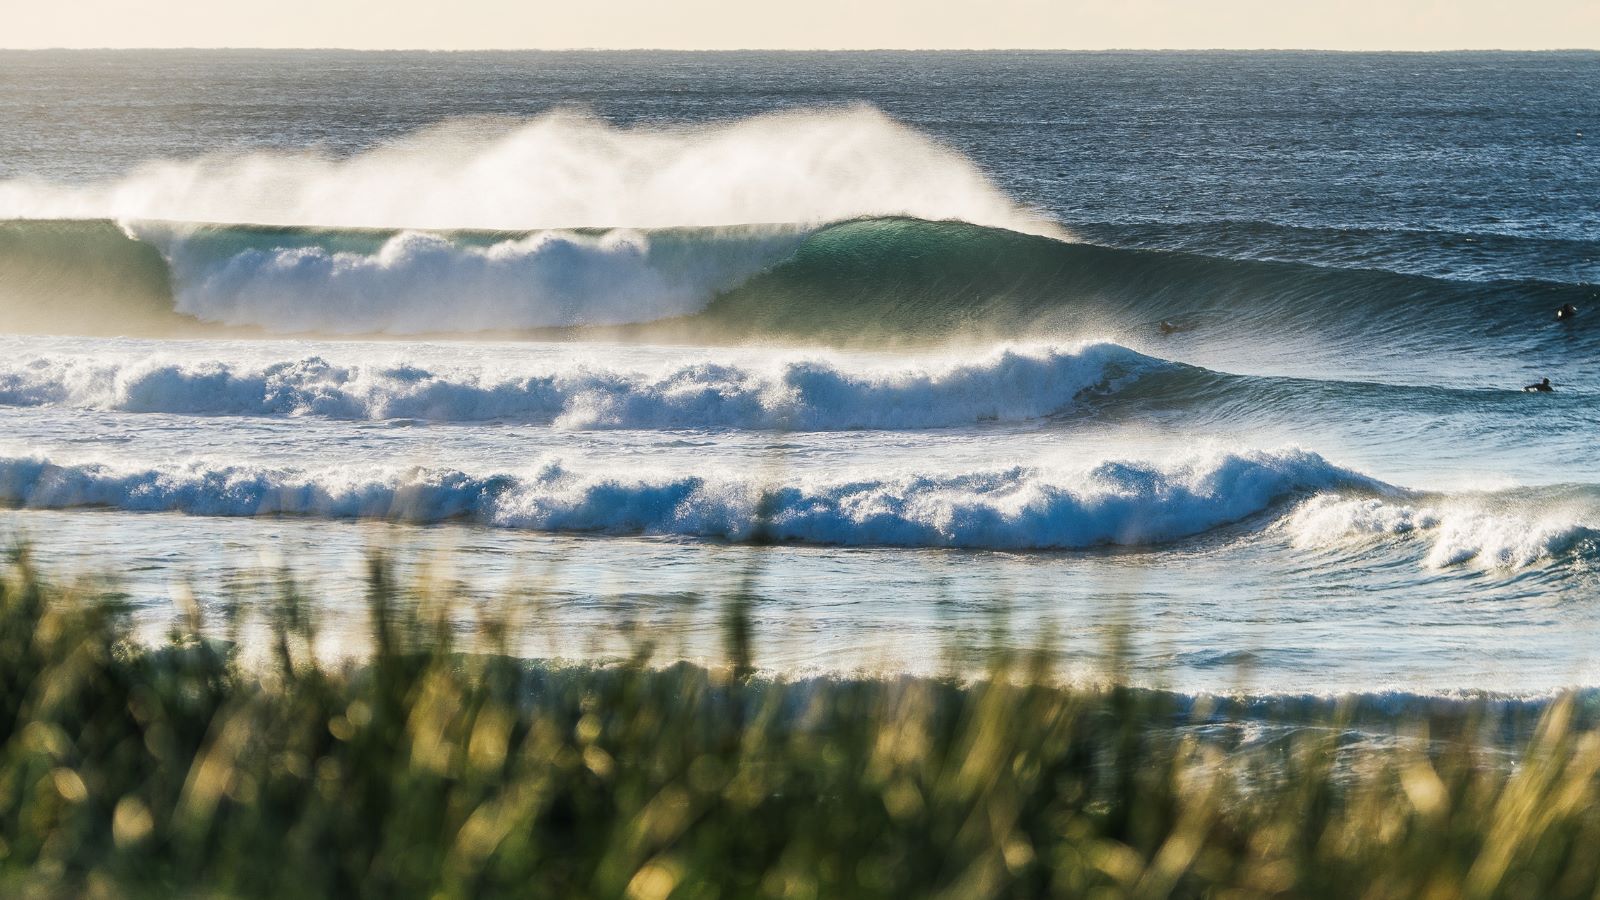 The epic lesft of North Narrabeen will welcome the world's best surfers for the second stop of the upcoming Australian leg of the WSL Championship Tour.